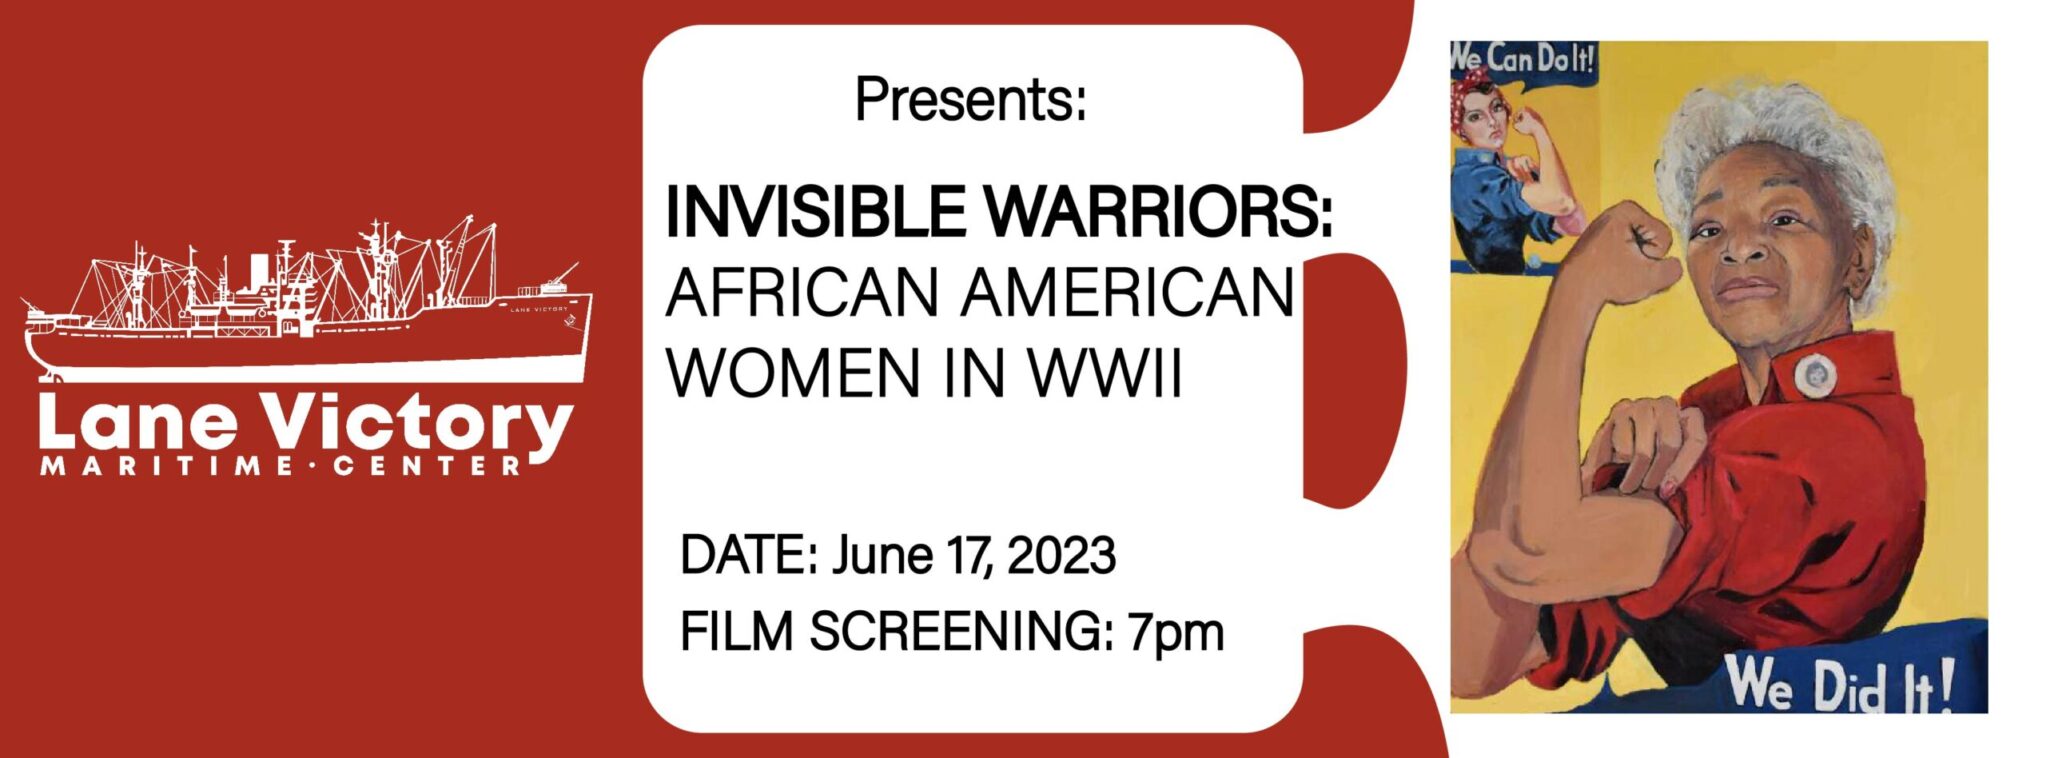 IW Page Update scaled e1675147756802 | INVISIBLE WARRIORS: AFRICAN AMERICAN WOMEN IN WORLD WAR II (Documentary Screening) | Lane Victory Maritime Center